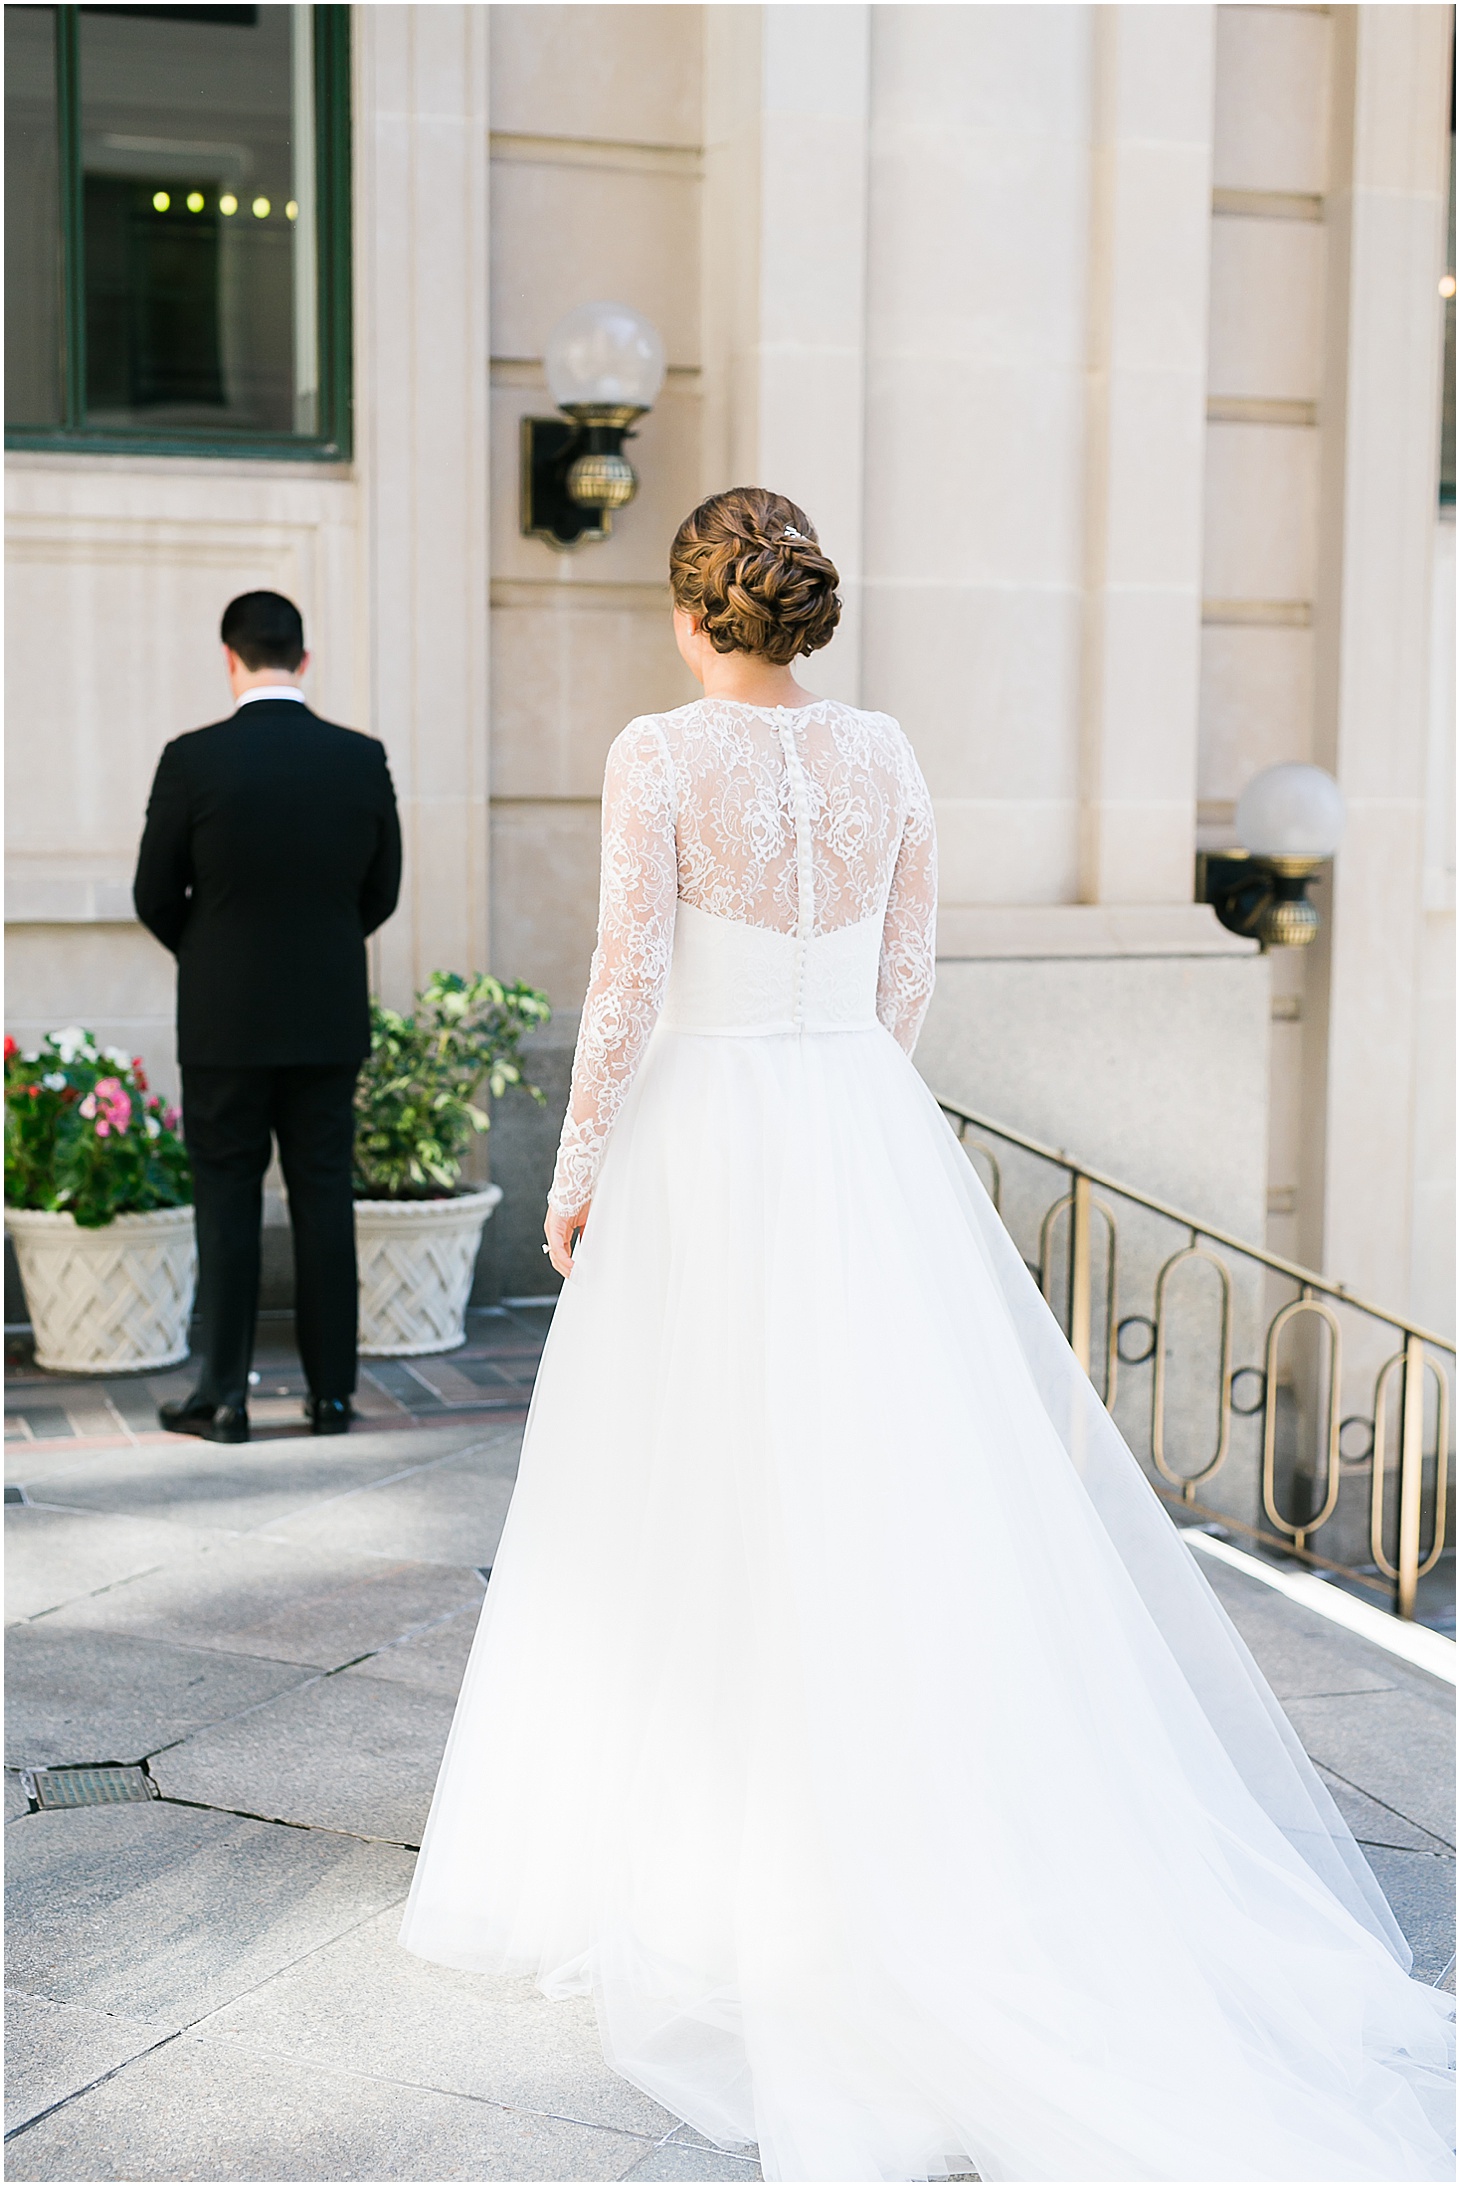 First Look at Willard InterContinental Hotel, Photographed by Sarah Bradshaw Photography, Romantic Candlelight Italian Wedding at Andrew Mellon Auditorium